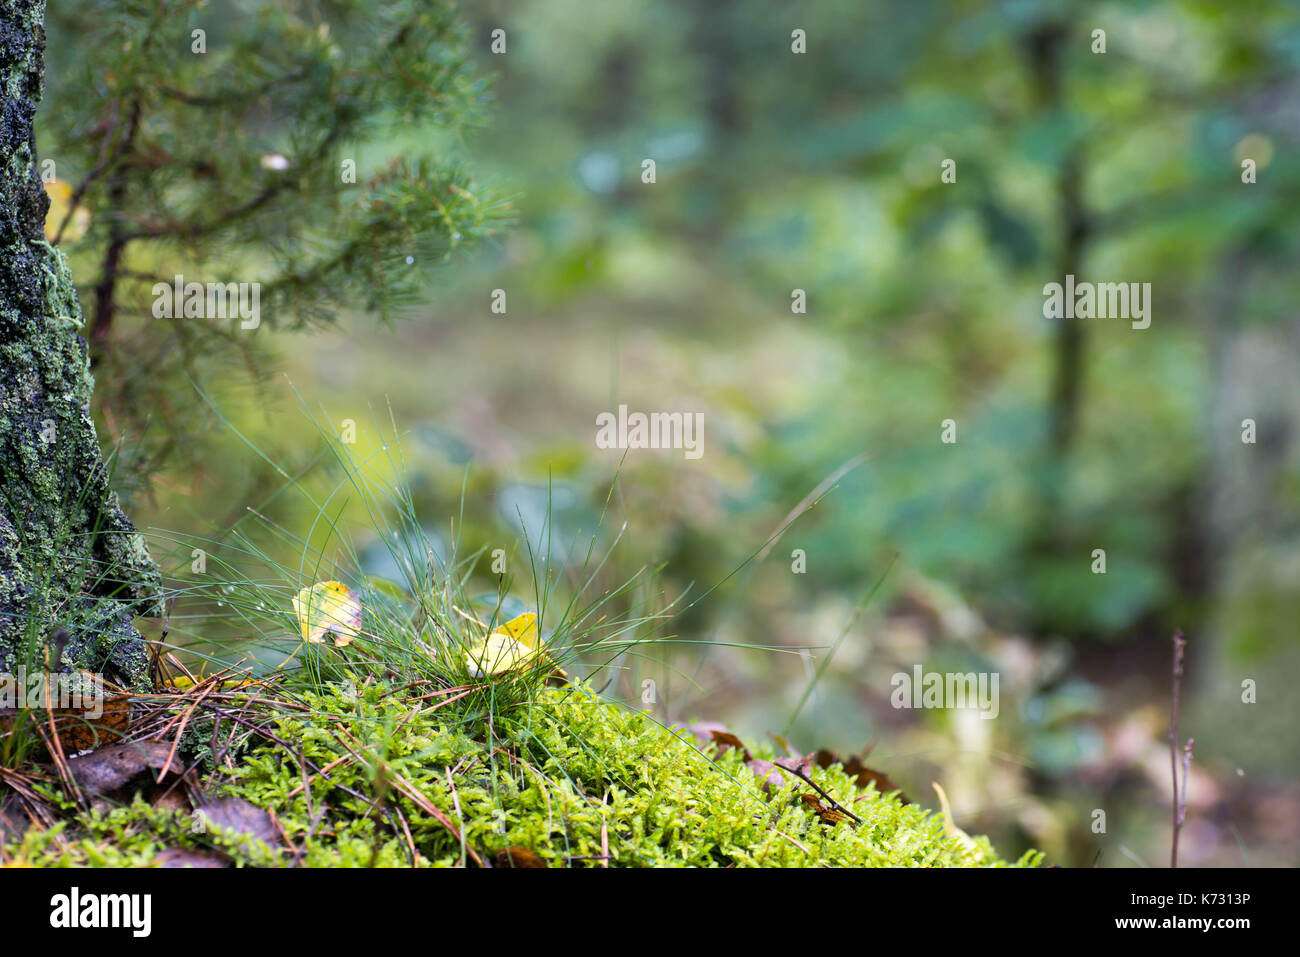 fall forest background with moss, leaves and tree trunk copy space Stock Photo